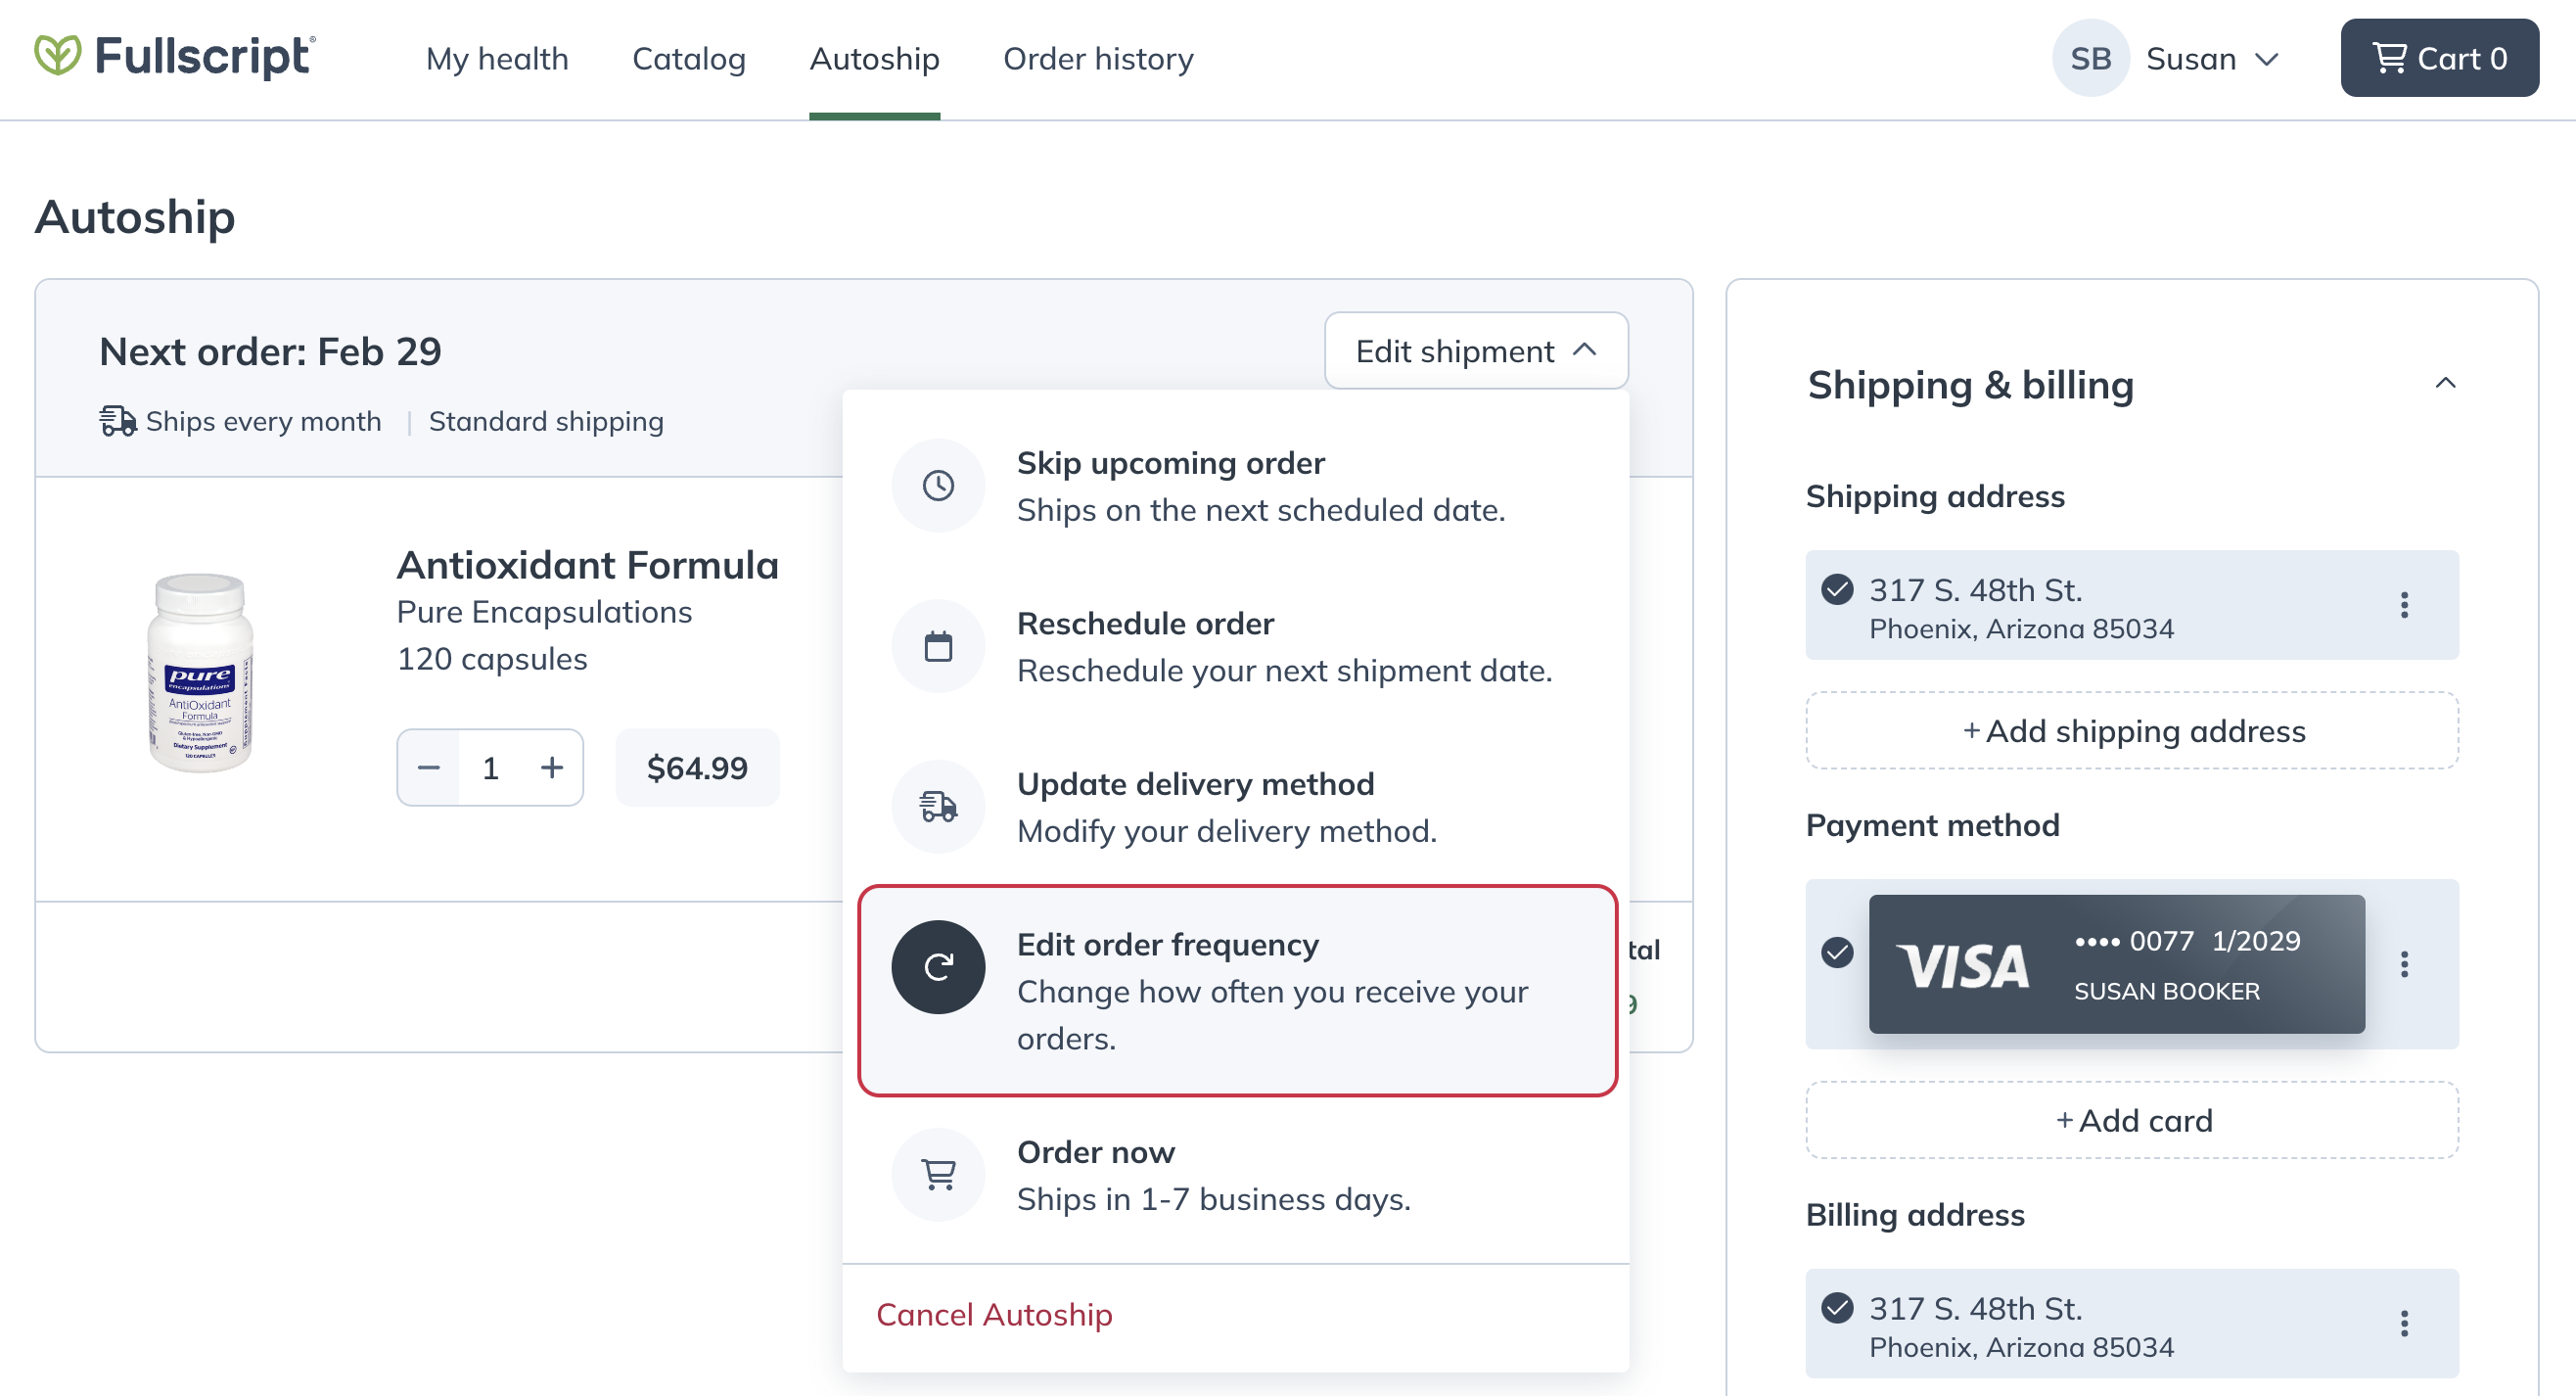 Managing shipping frequency from the autoship page